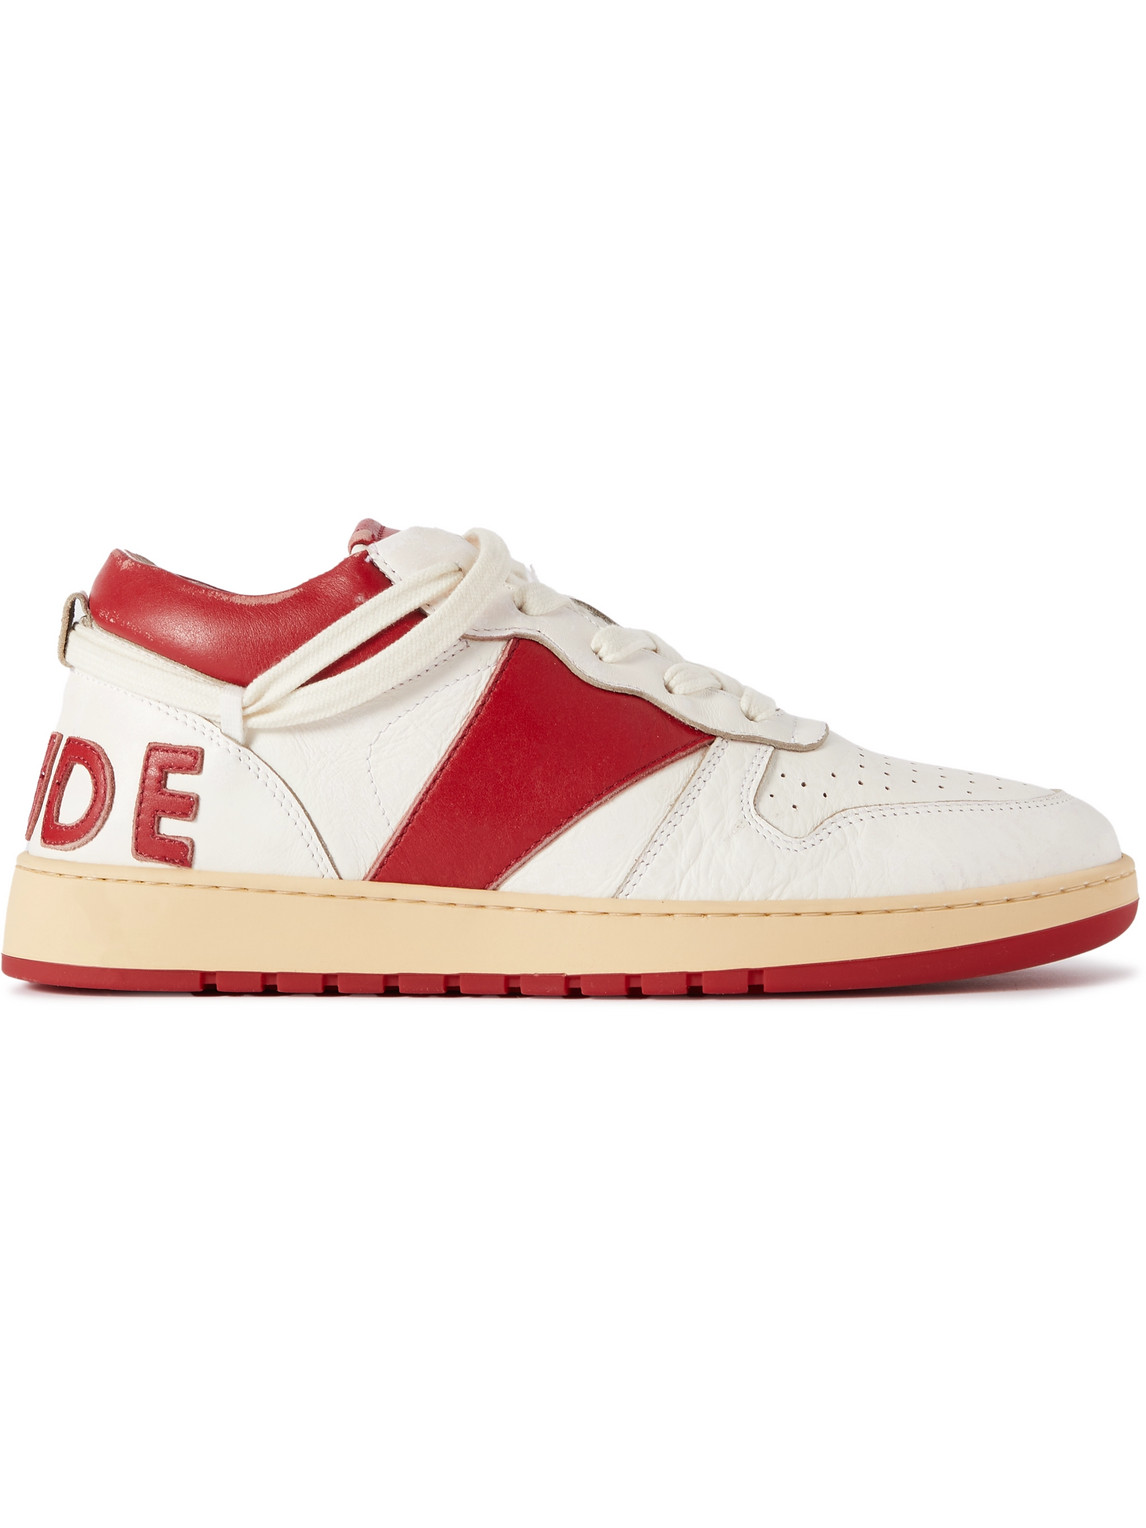 Rhude - Rhecess Colour-Block Distressed Leather Sneakers - Men - White - US 11 von Rhude